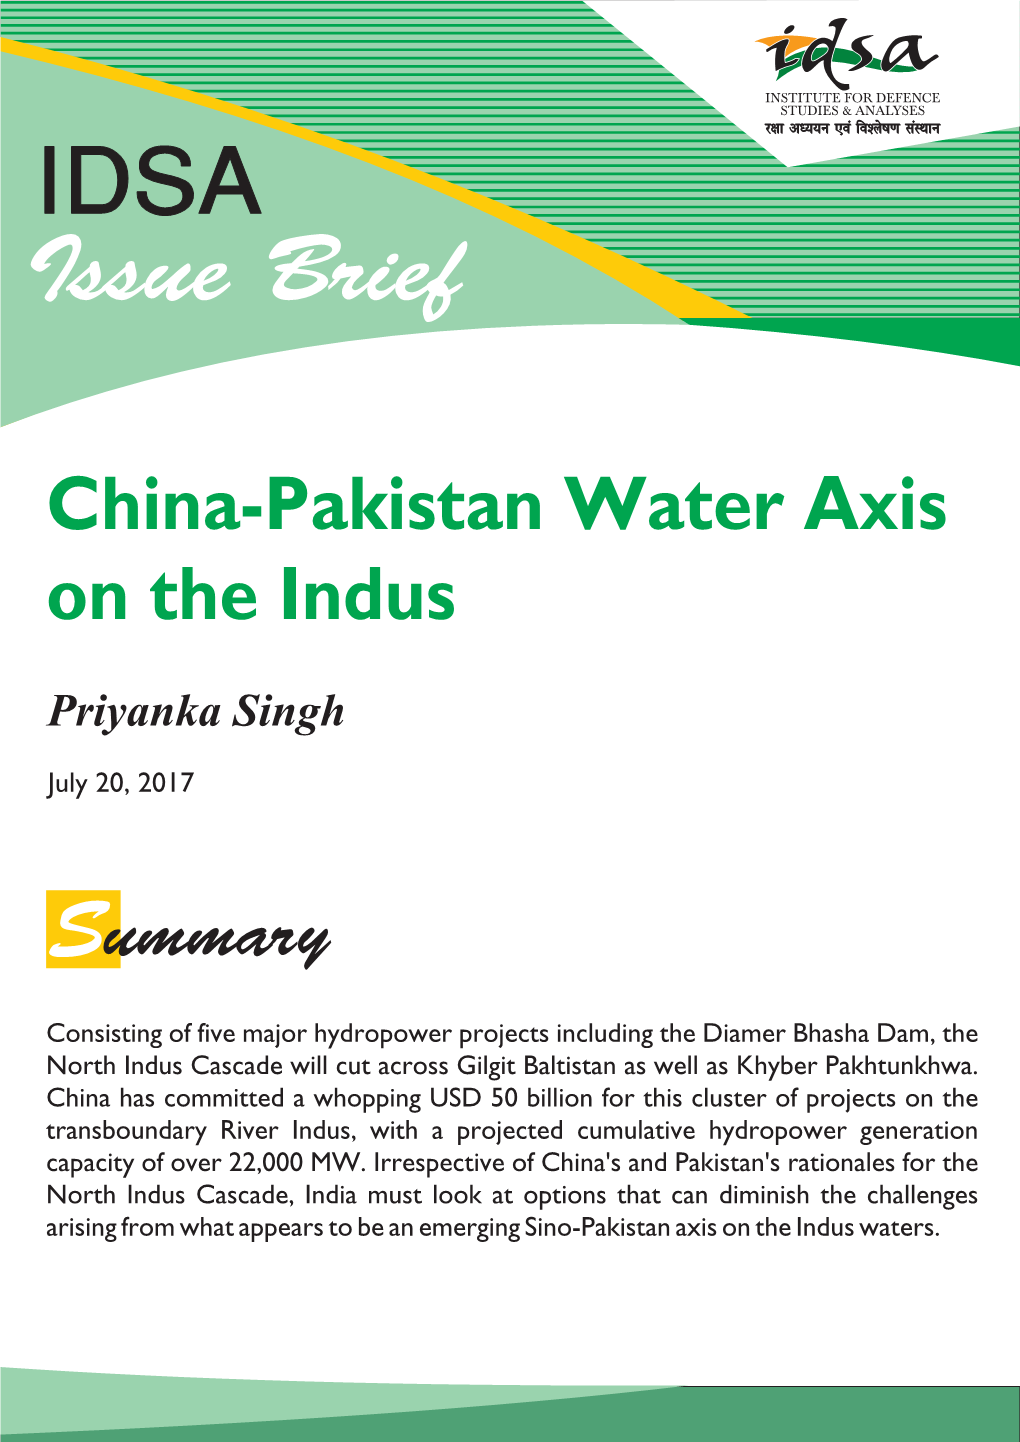 China-Pakistan Water Axis on the Indus